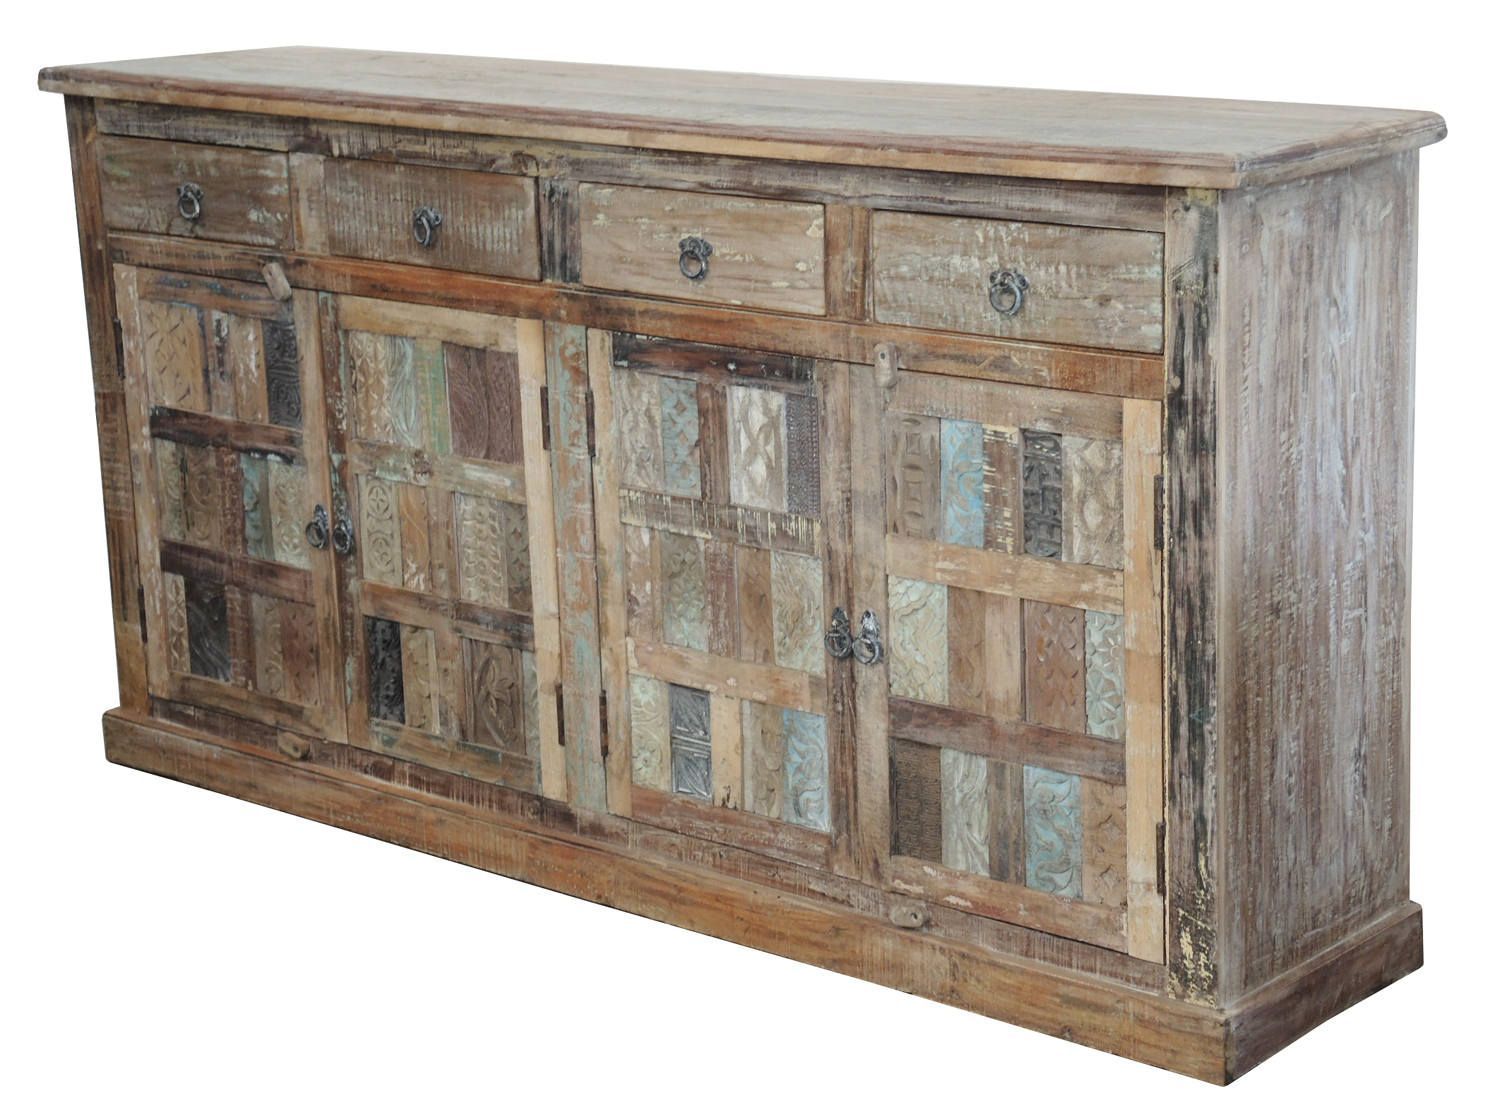 Light Distressed Indian Teak Cabinet From Terra Nova Designs Intended For Most Popular Hayslett Sideboards (View 7 of 20)